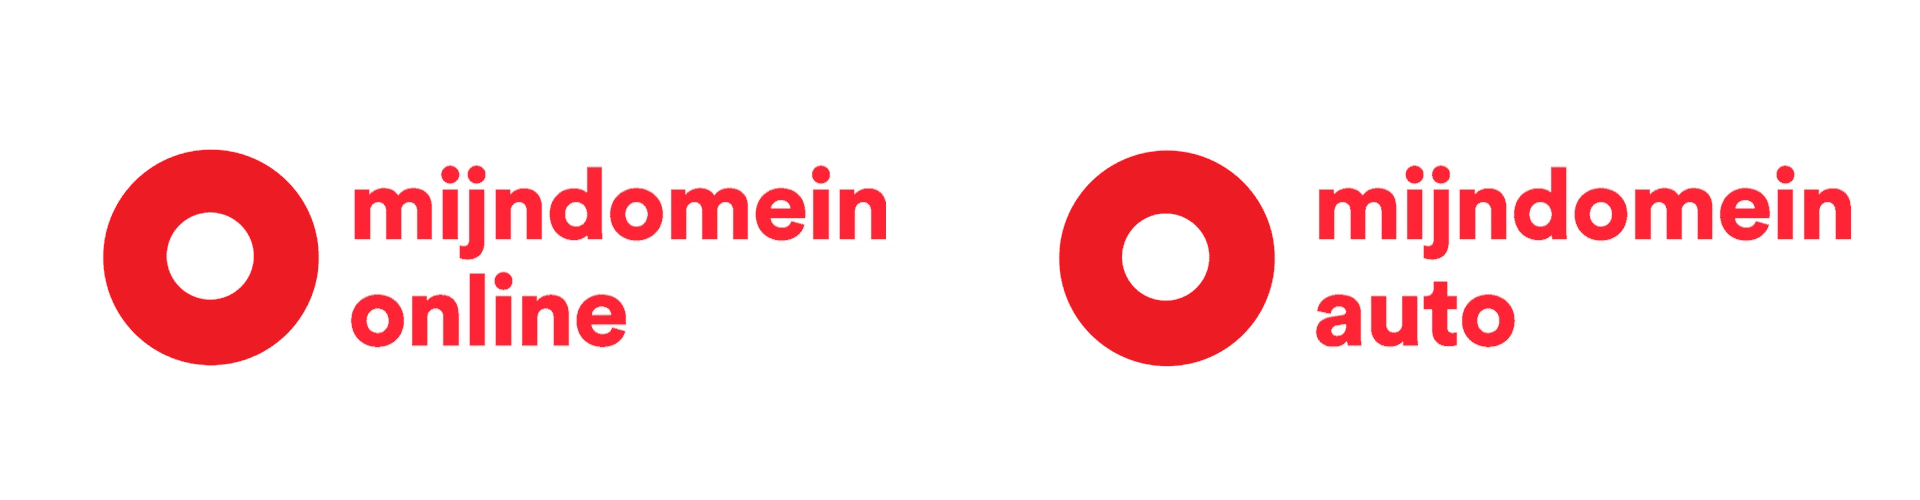 animated logos for mijndomein subbrands: auto and online